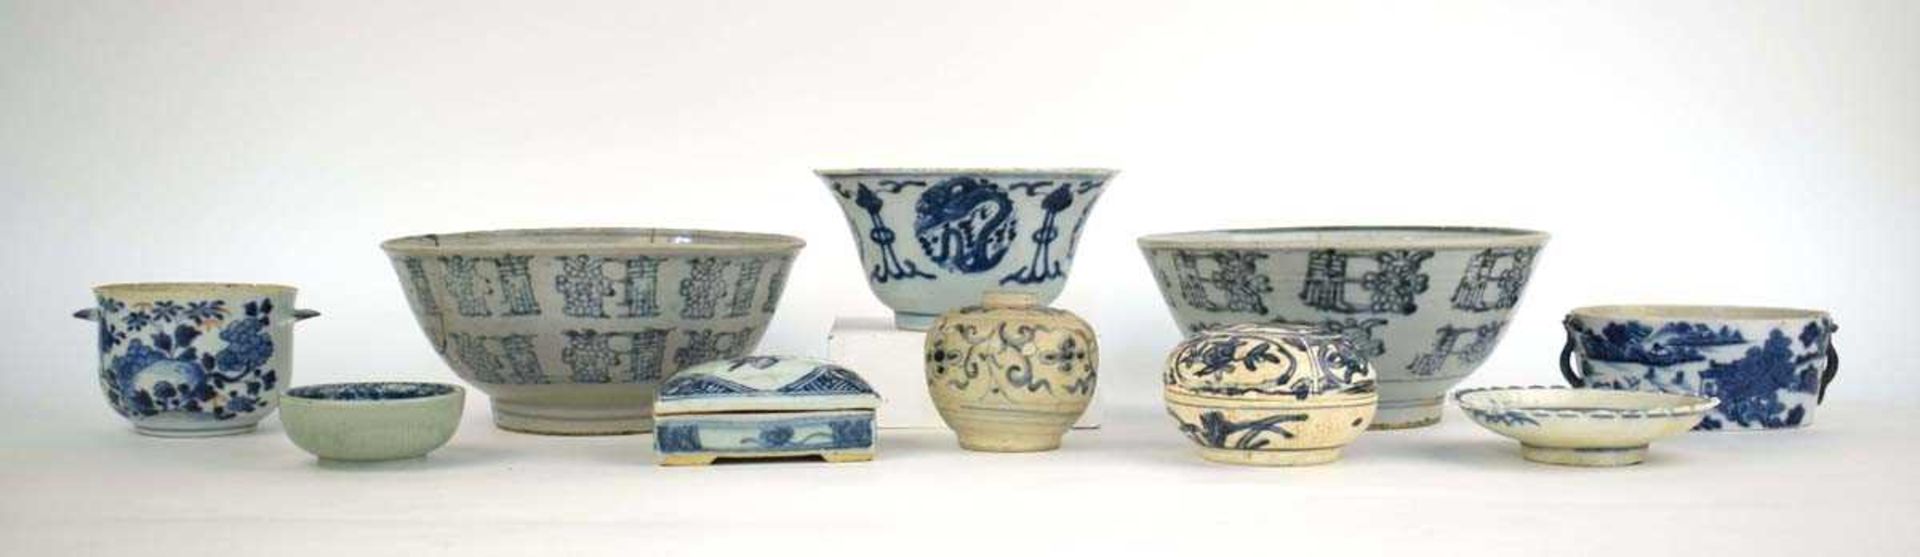 A (?)Vietnamese blue and white miniature jar decorated with scrolls and leaf shaped motifs, h. 17.